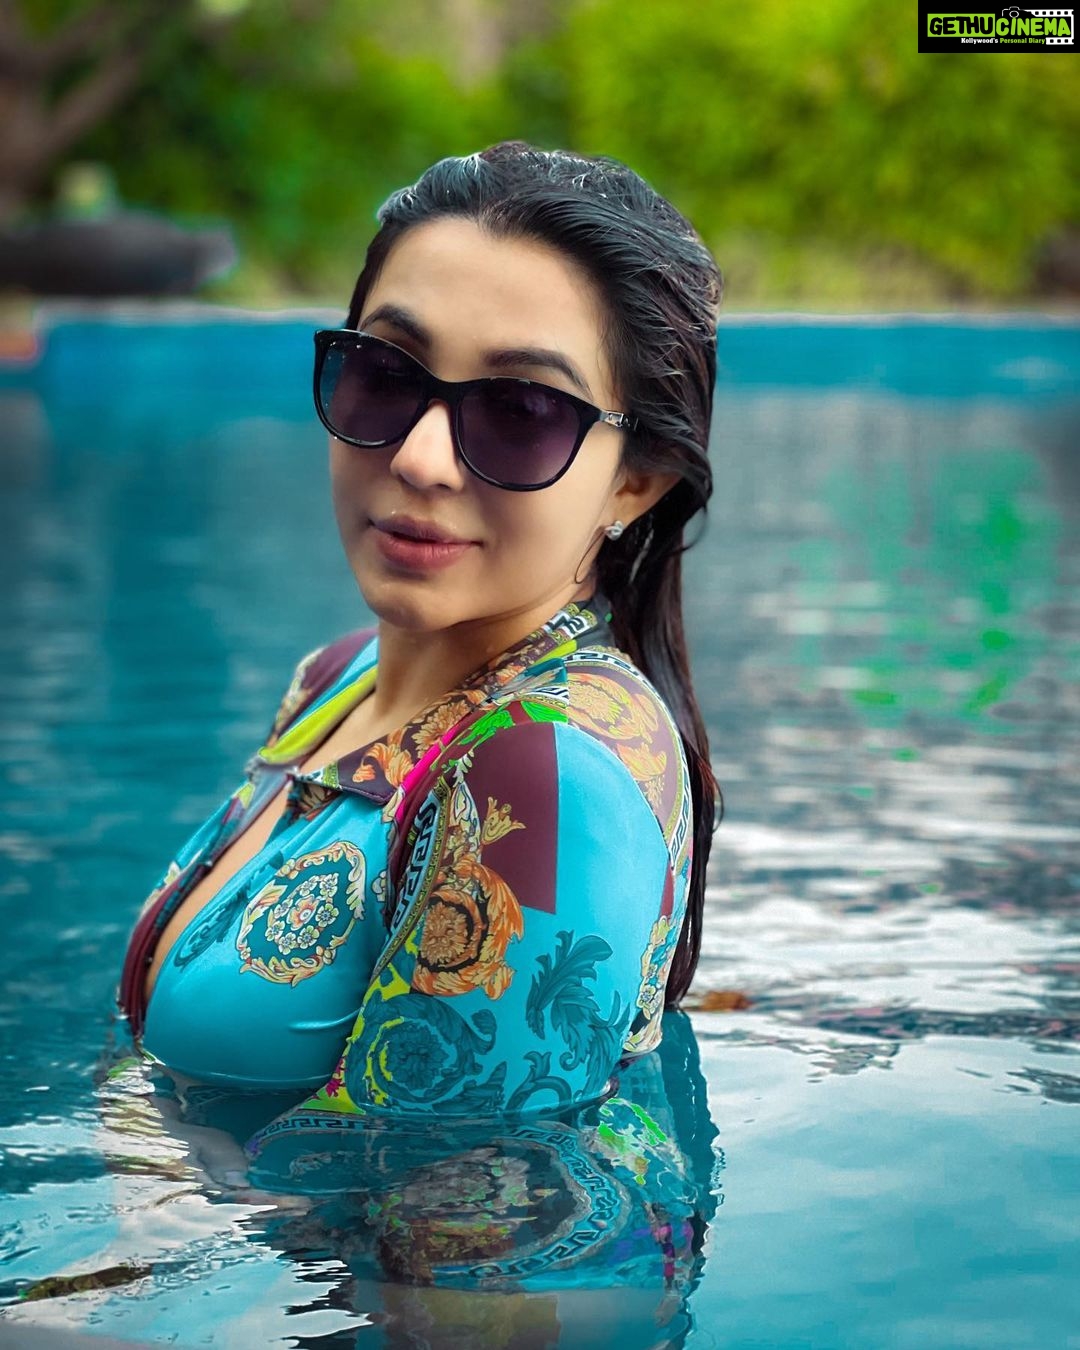 Parvatii Nair - 116K Likes - Most Liked Instagram Photos